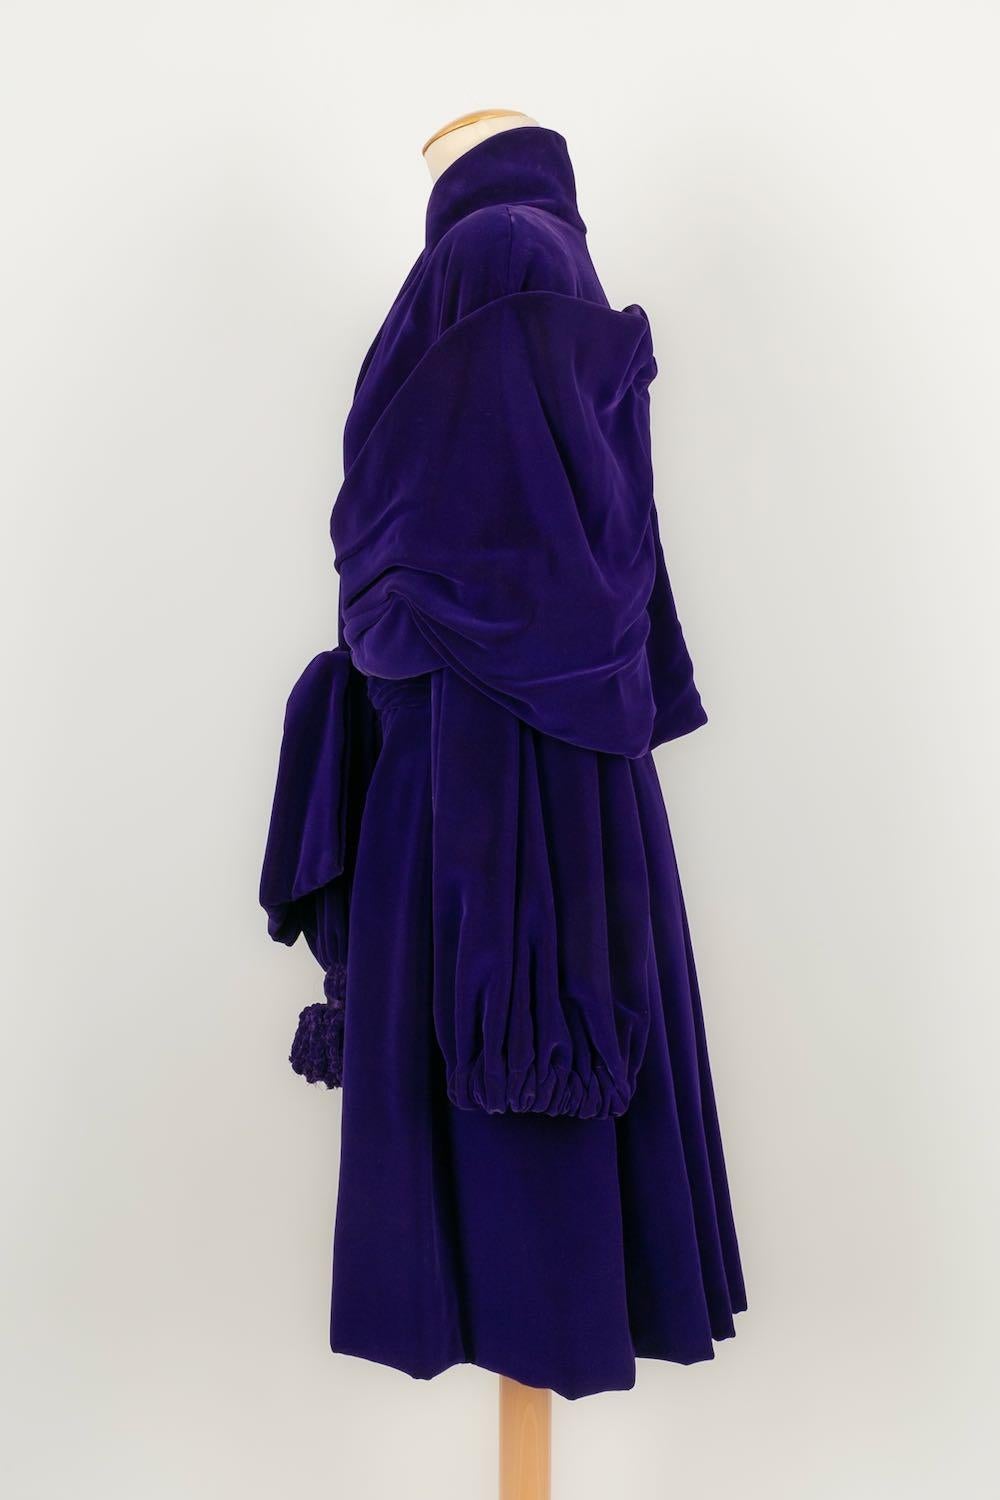 Christian Lacroix - (Made in France) Purple silk velvet Haute Couture coat. Size indicated 44FR.

Additional information: 
Dimensions: Shoulder width: 45 cm, Chest: 50 cm, Waist: 36 cm, Sleeve length: 64 cm, Length: 100 cm
Condition: Very good